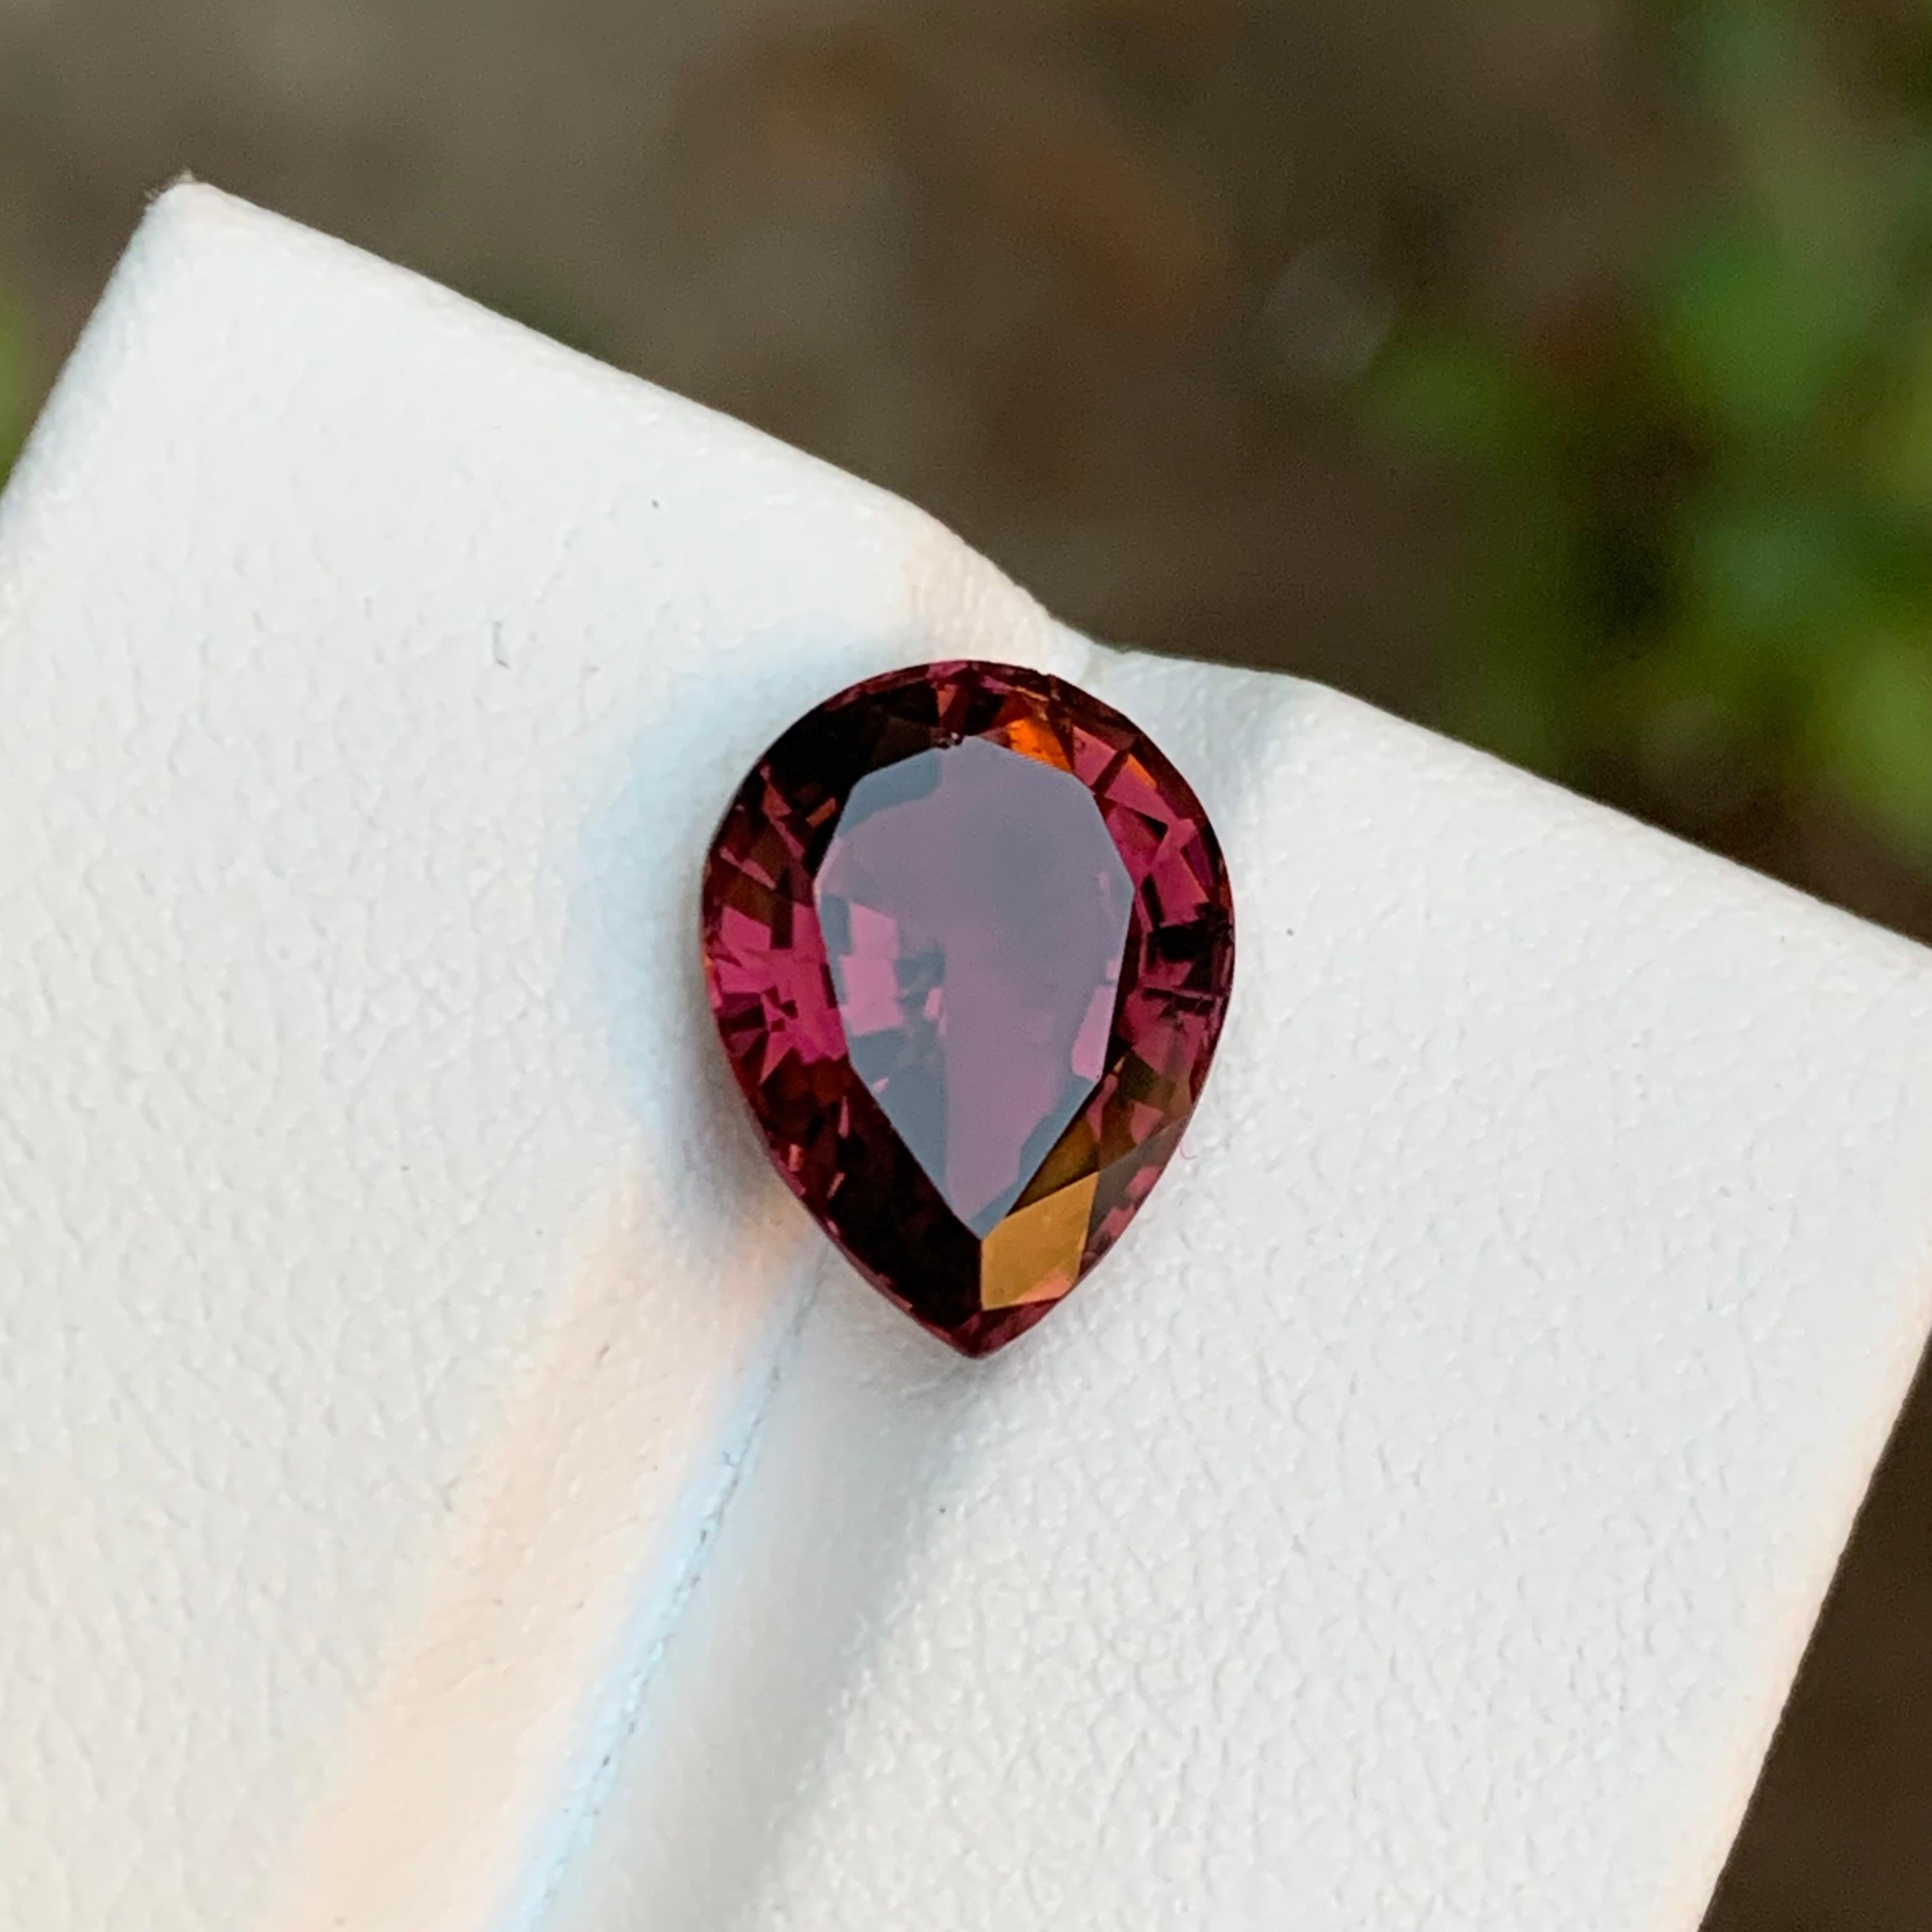 GEMSTONE TYPE: Tourmaline
PIECE(S): 1
WEIGHT: 3.50 Carats
SHAPE: Pear 
SIZE (MM): 11.97 x 9.08 x 5.52
COLOR: Purplish Deep Pink
CLARITY: Approx Eye Clean
TREATMENT: Heated
ORIGIN: Africa
CERTIFICATE: On demand
(if you require a certificate, kindly